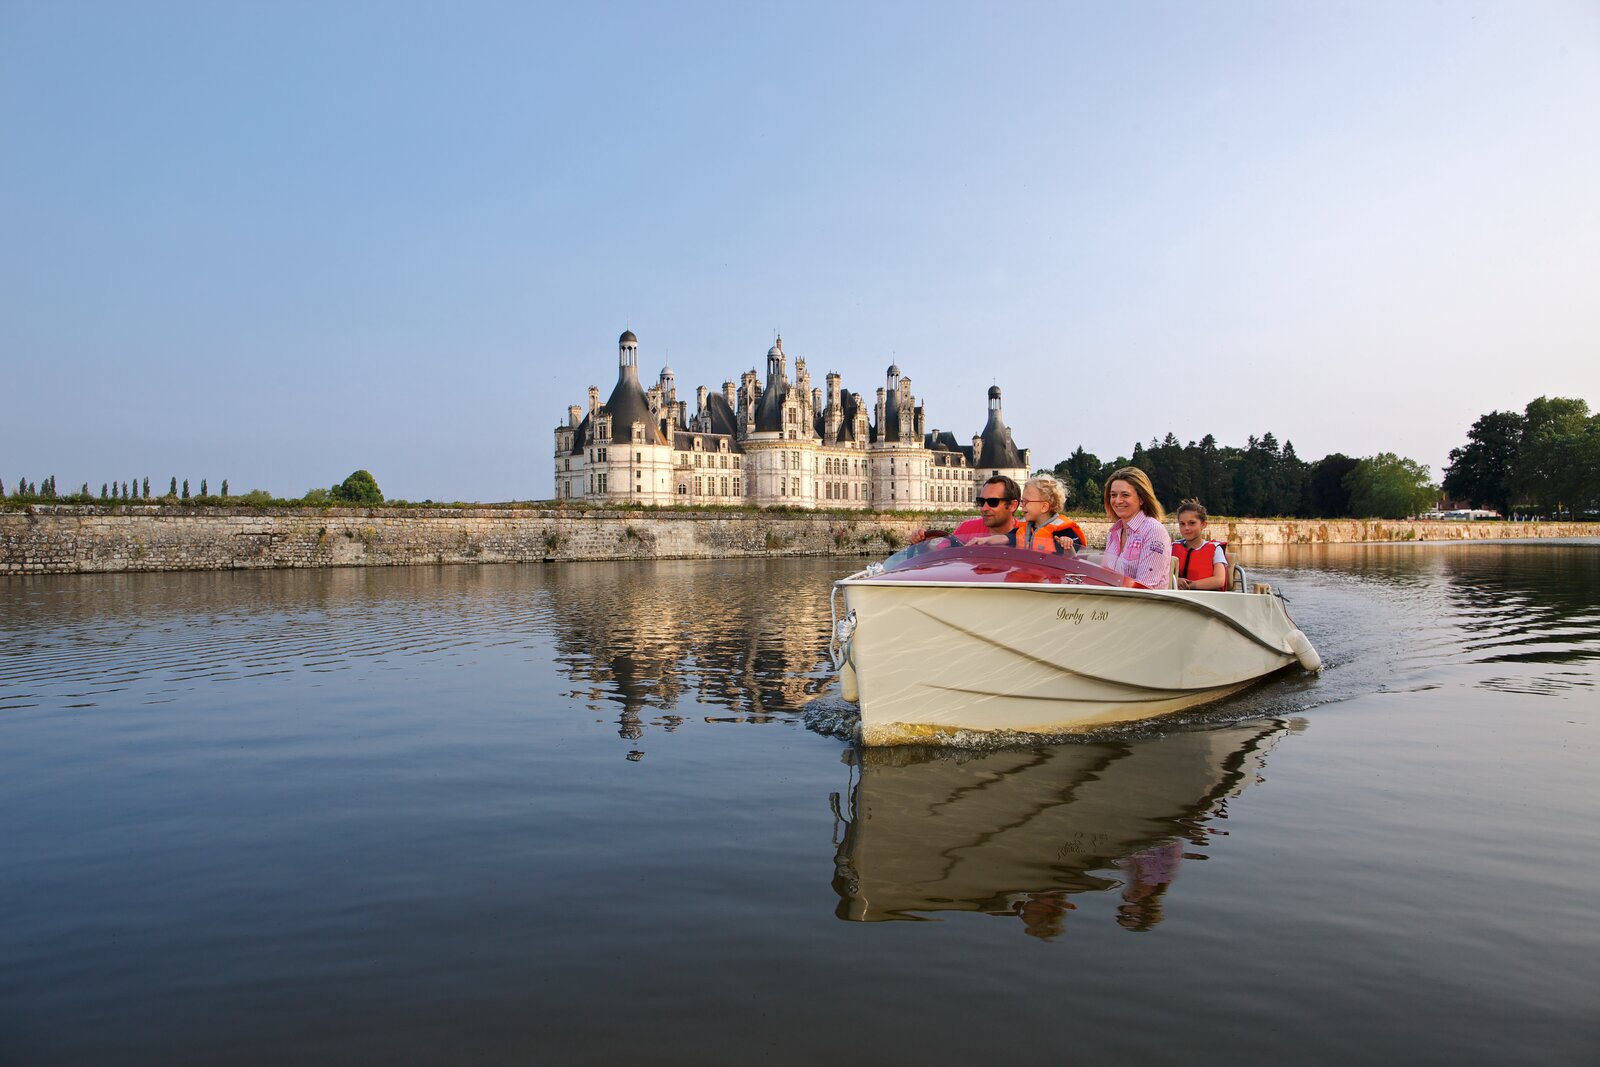 Boat rides in the Cosson River, right infront of the château de Chambord.